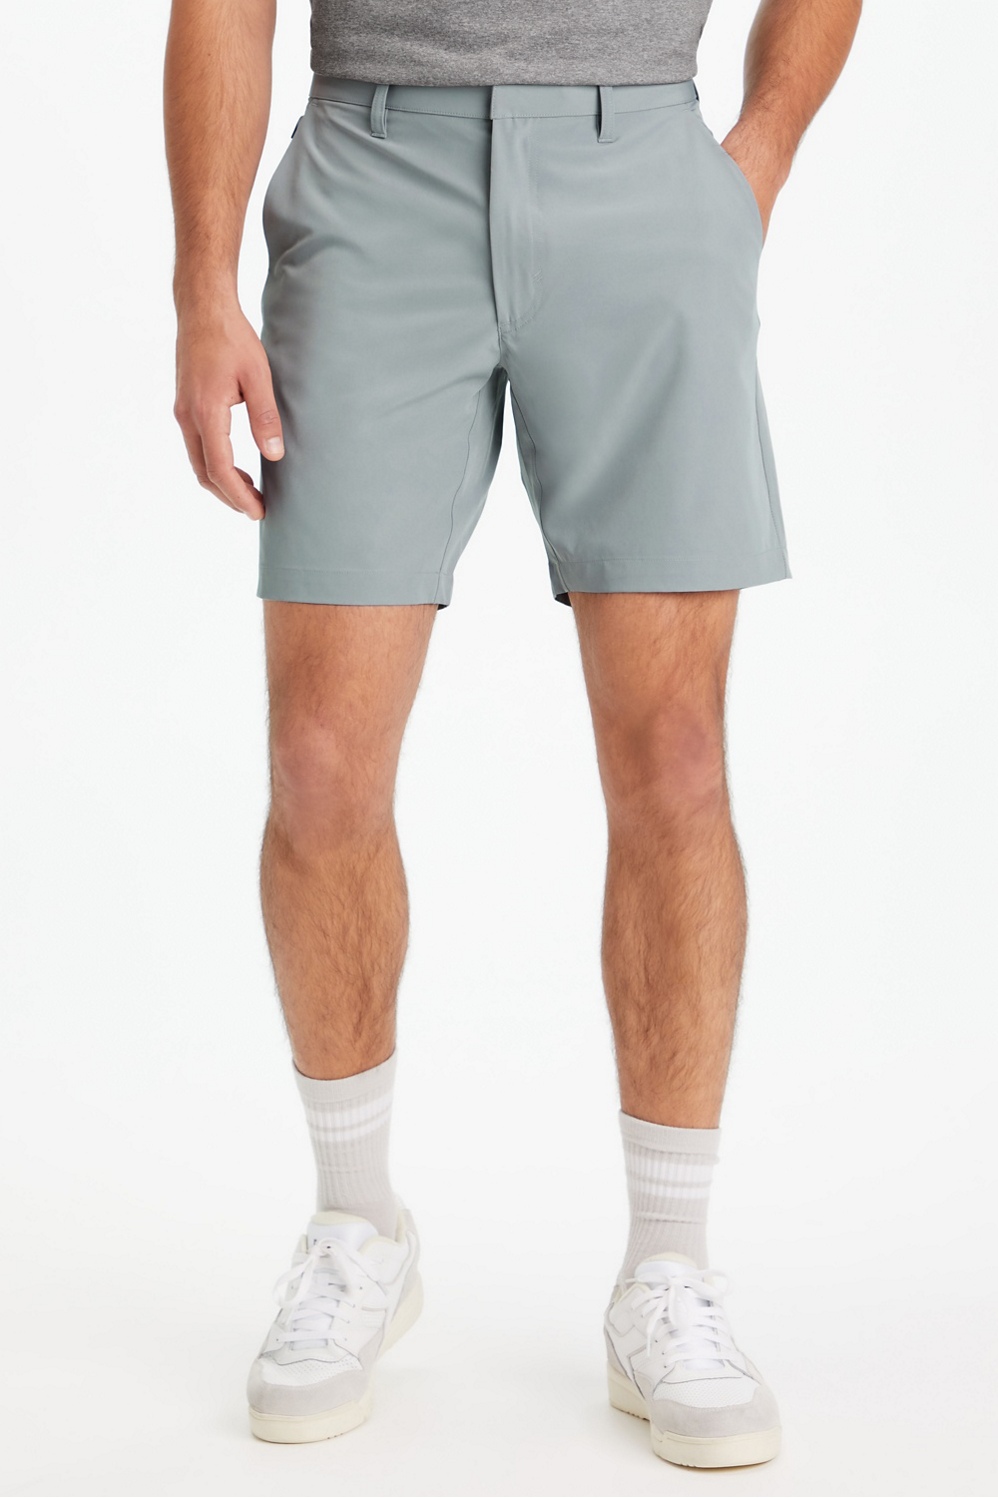 BIG 105.9 - According to the consensus on TikTok and Twitter, the best  length for men's shorts is . . . a five-and-a-half-inch inseam. Those are short  shorts that will show off